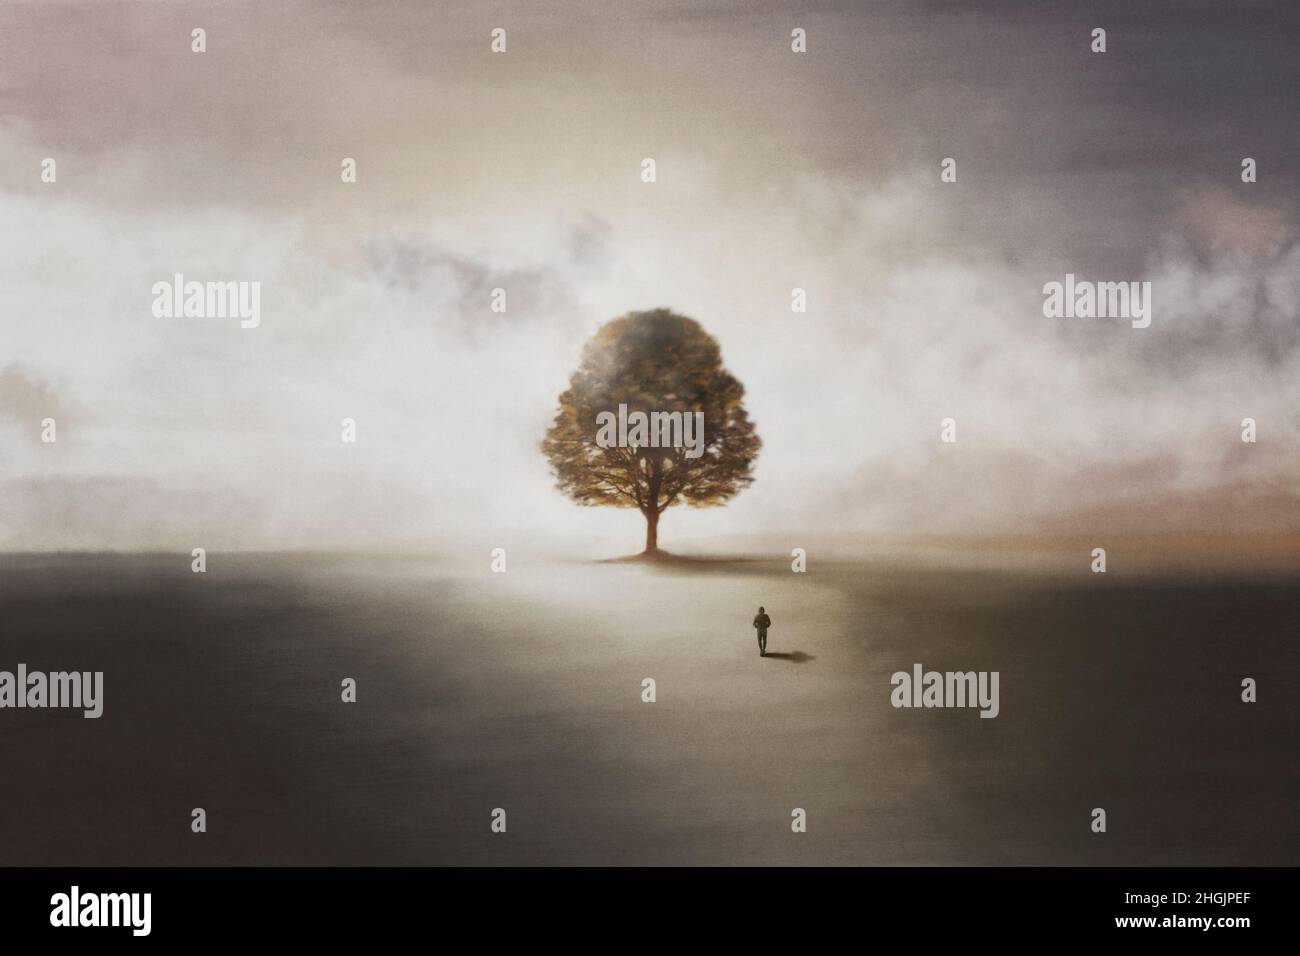 illustration with lonely man walking towards a tree, symbol of life Stock Photo